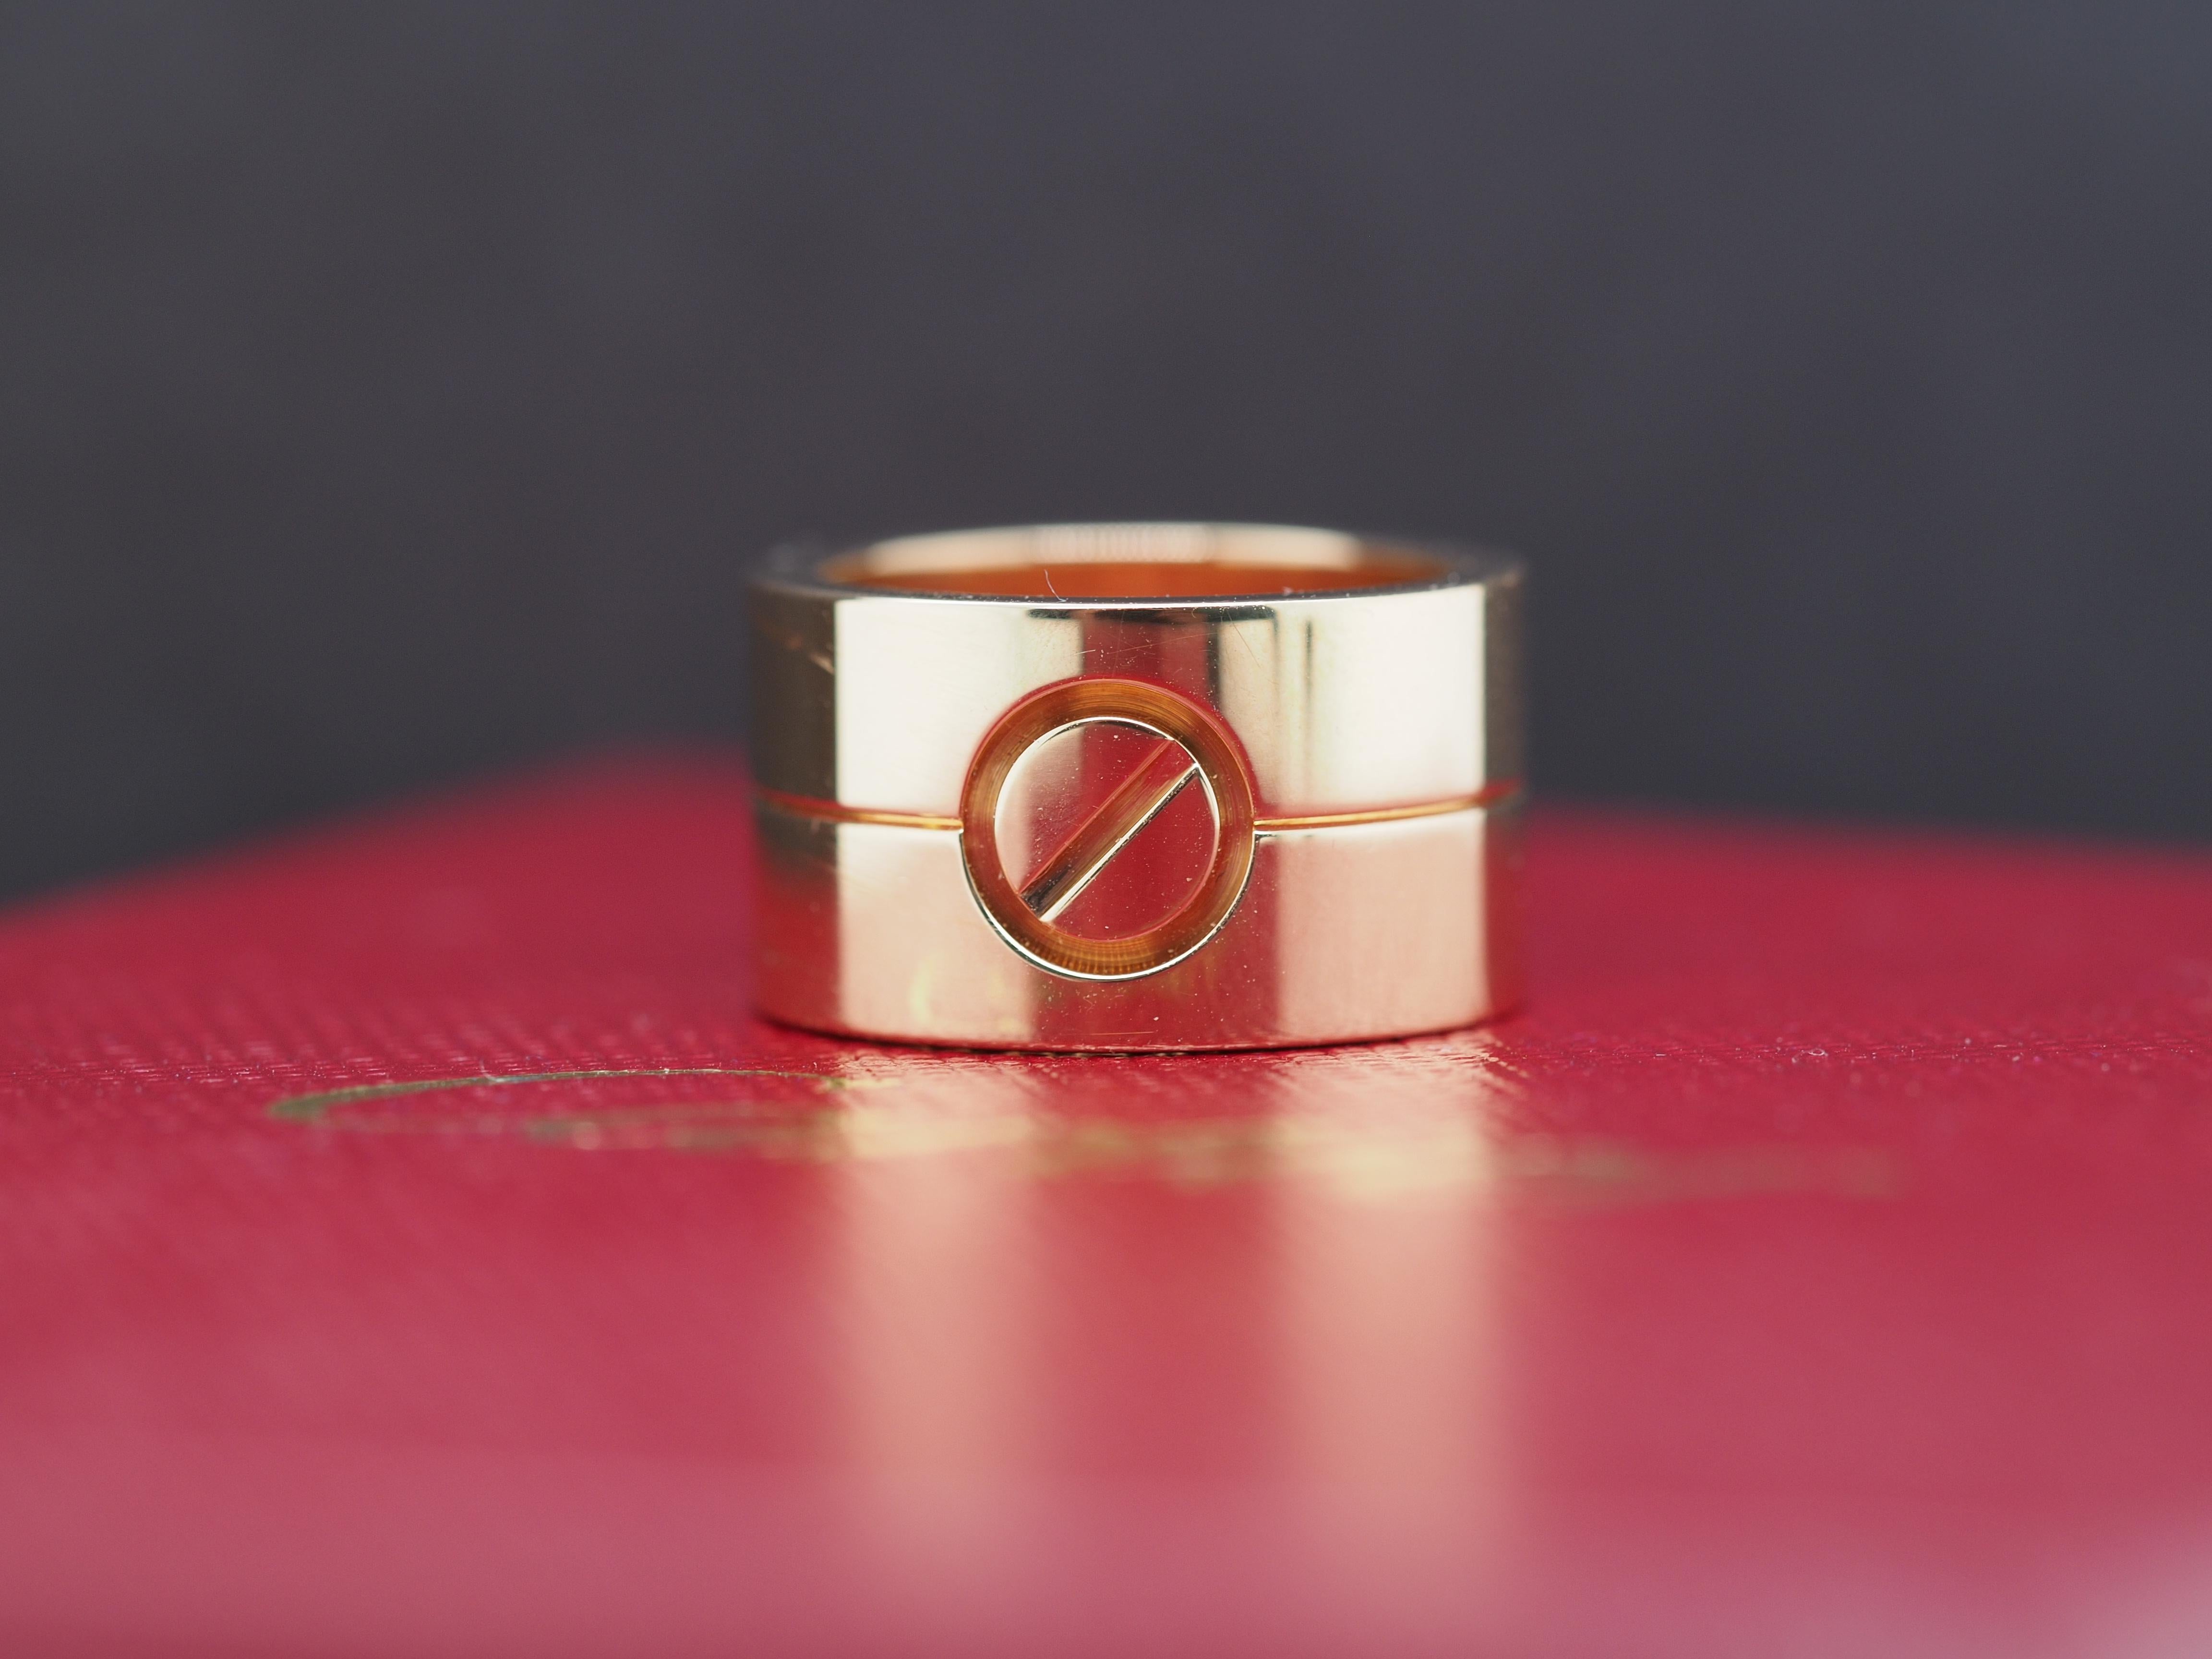 Year: 2000

Item Details:
Ring Size: 4.5 [CARTIER Size: 48]
Metal Type: 18K Yellow Gold [Hallmarked, and Tested]
Weight: 14.7 grams

‌

Band Width: 0.9 mm
Condition: Excellent